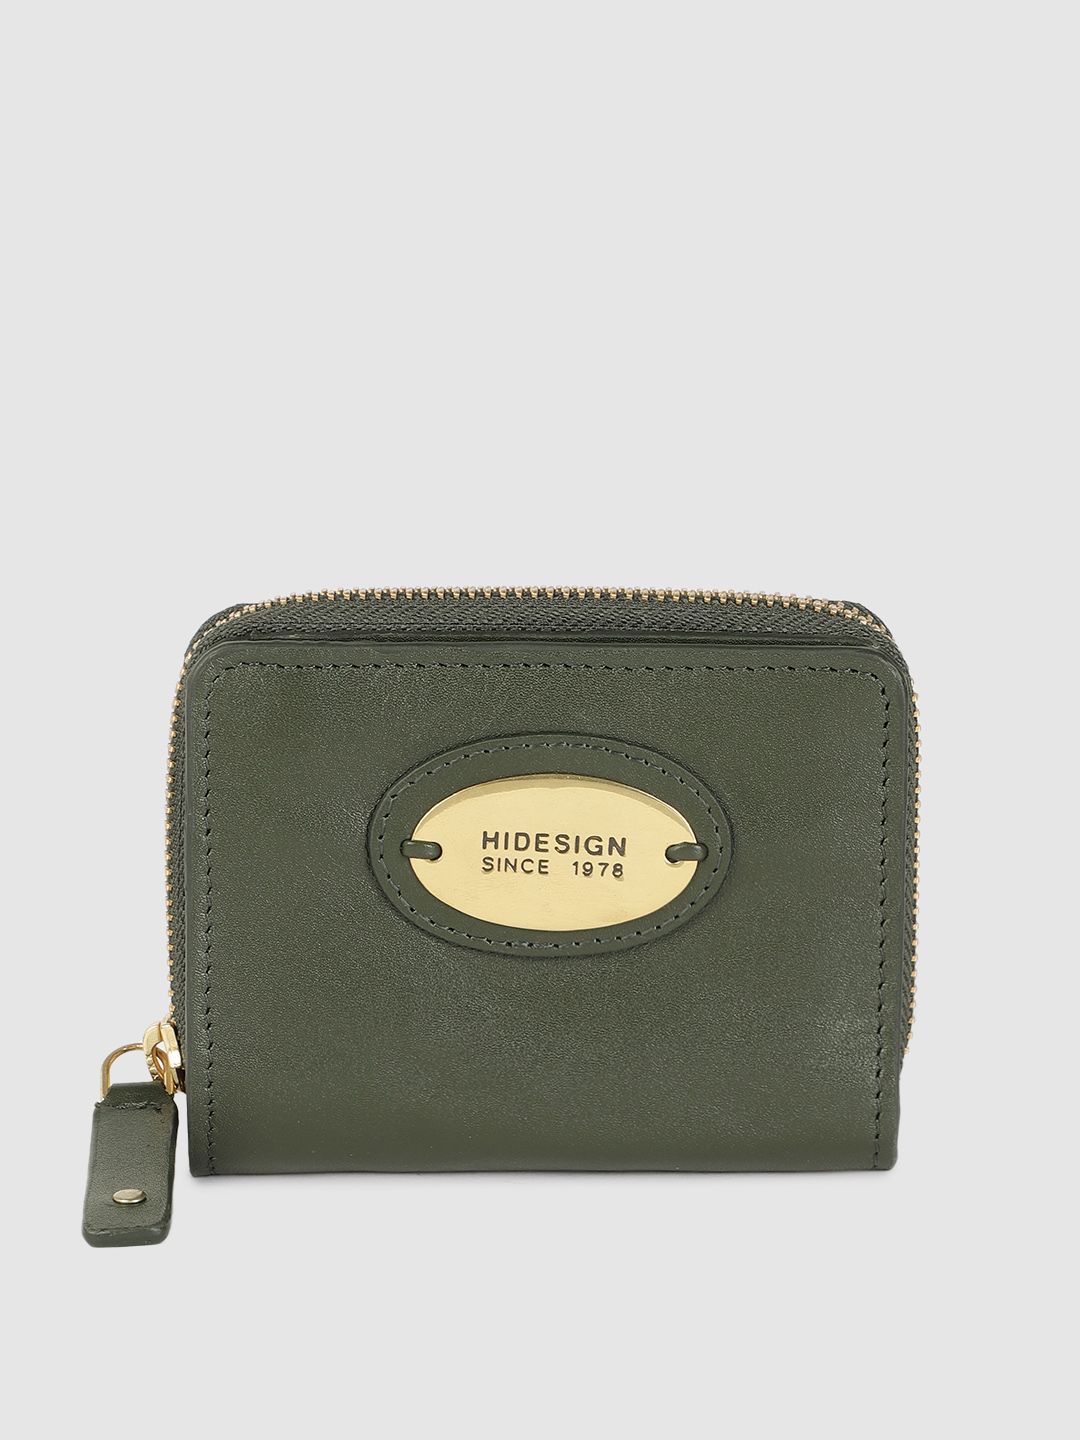 Hidesign Women Green Leather Two Fold Wallet Price in India